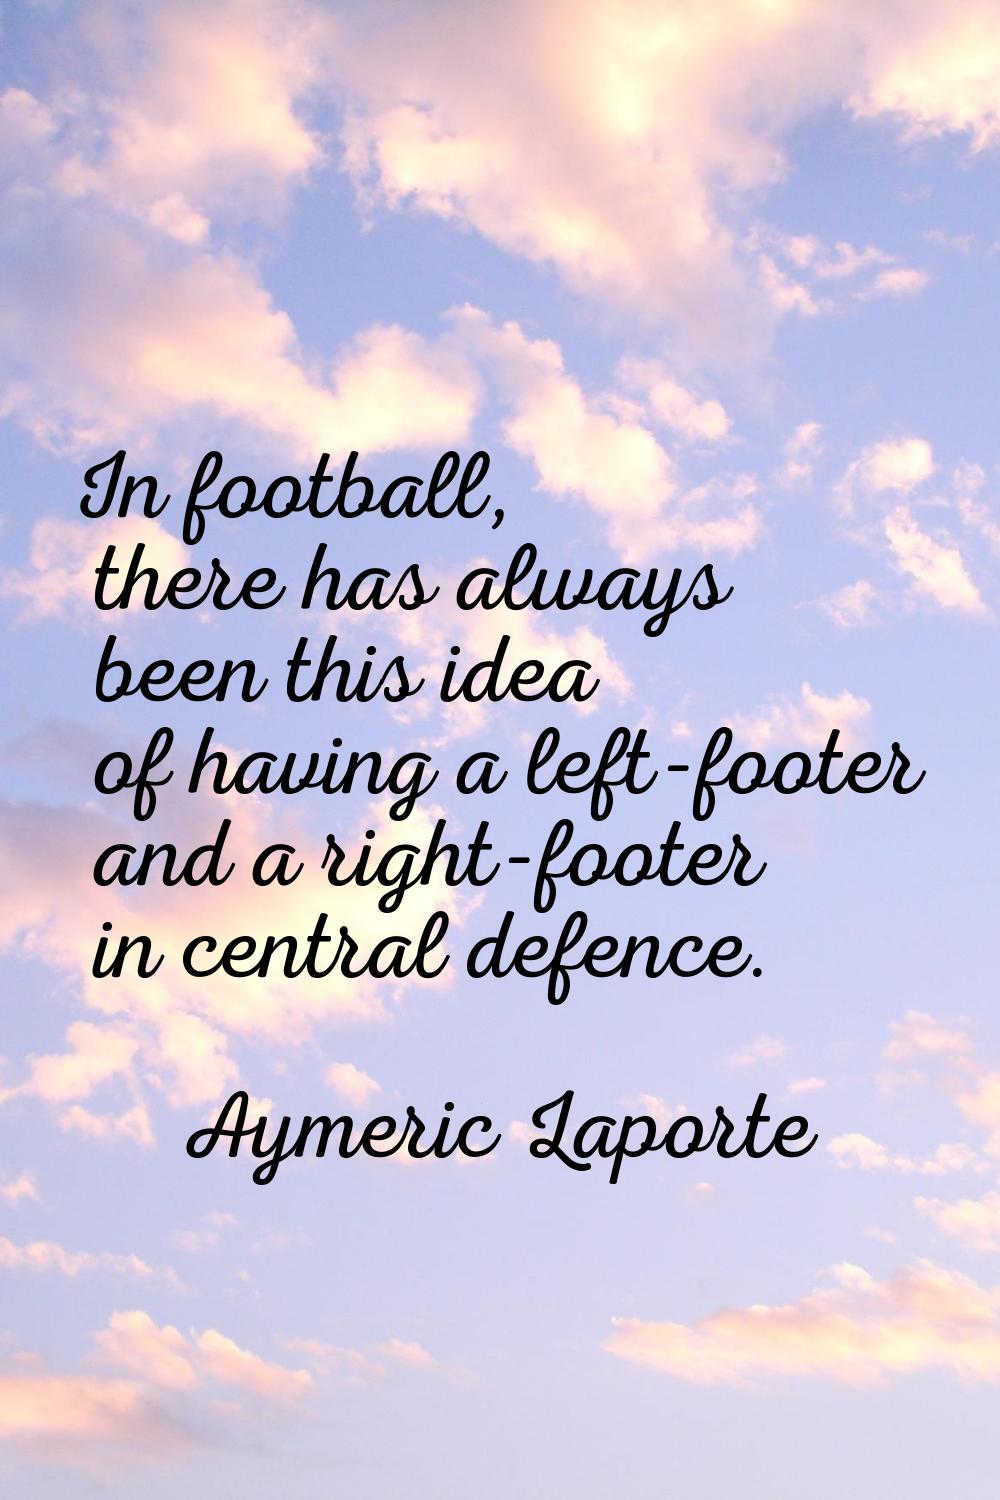 In football, there has always been this idea of having a left-footer and a right-footer in central 